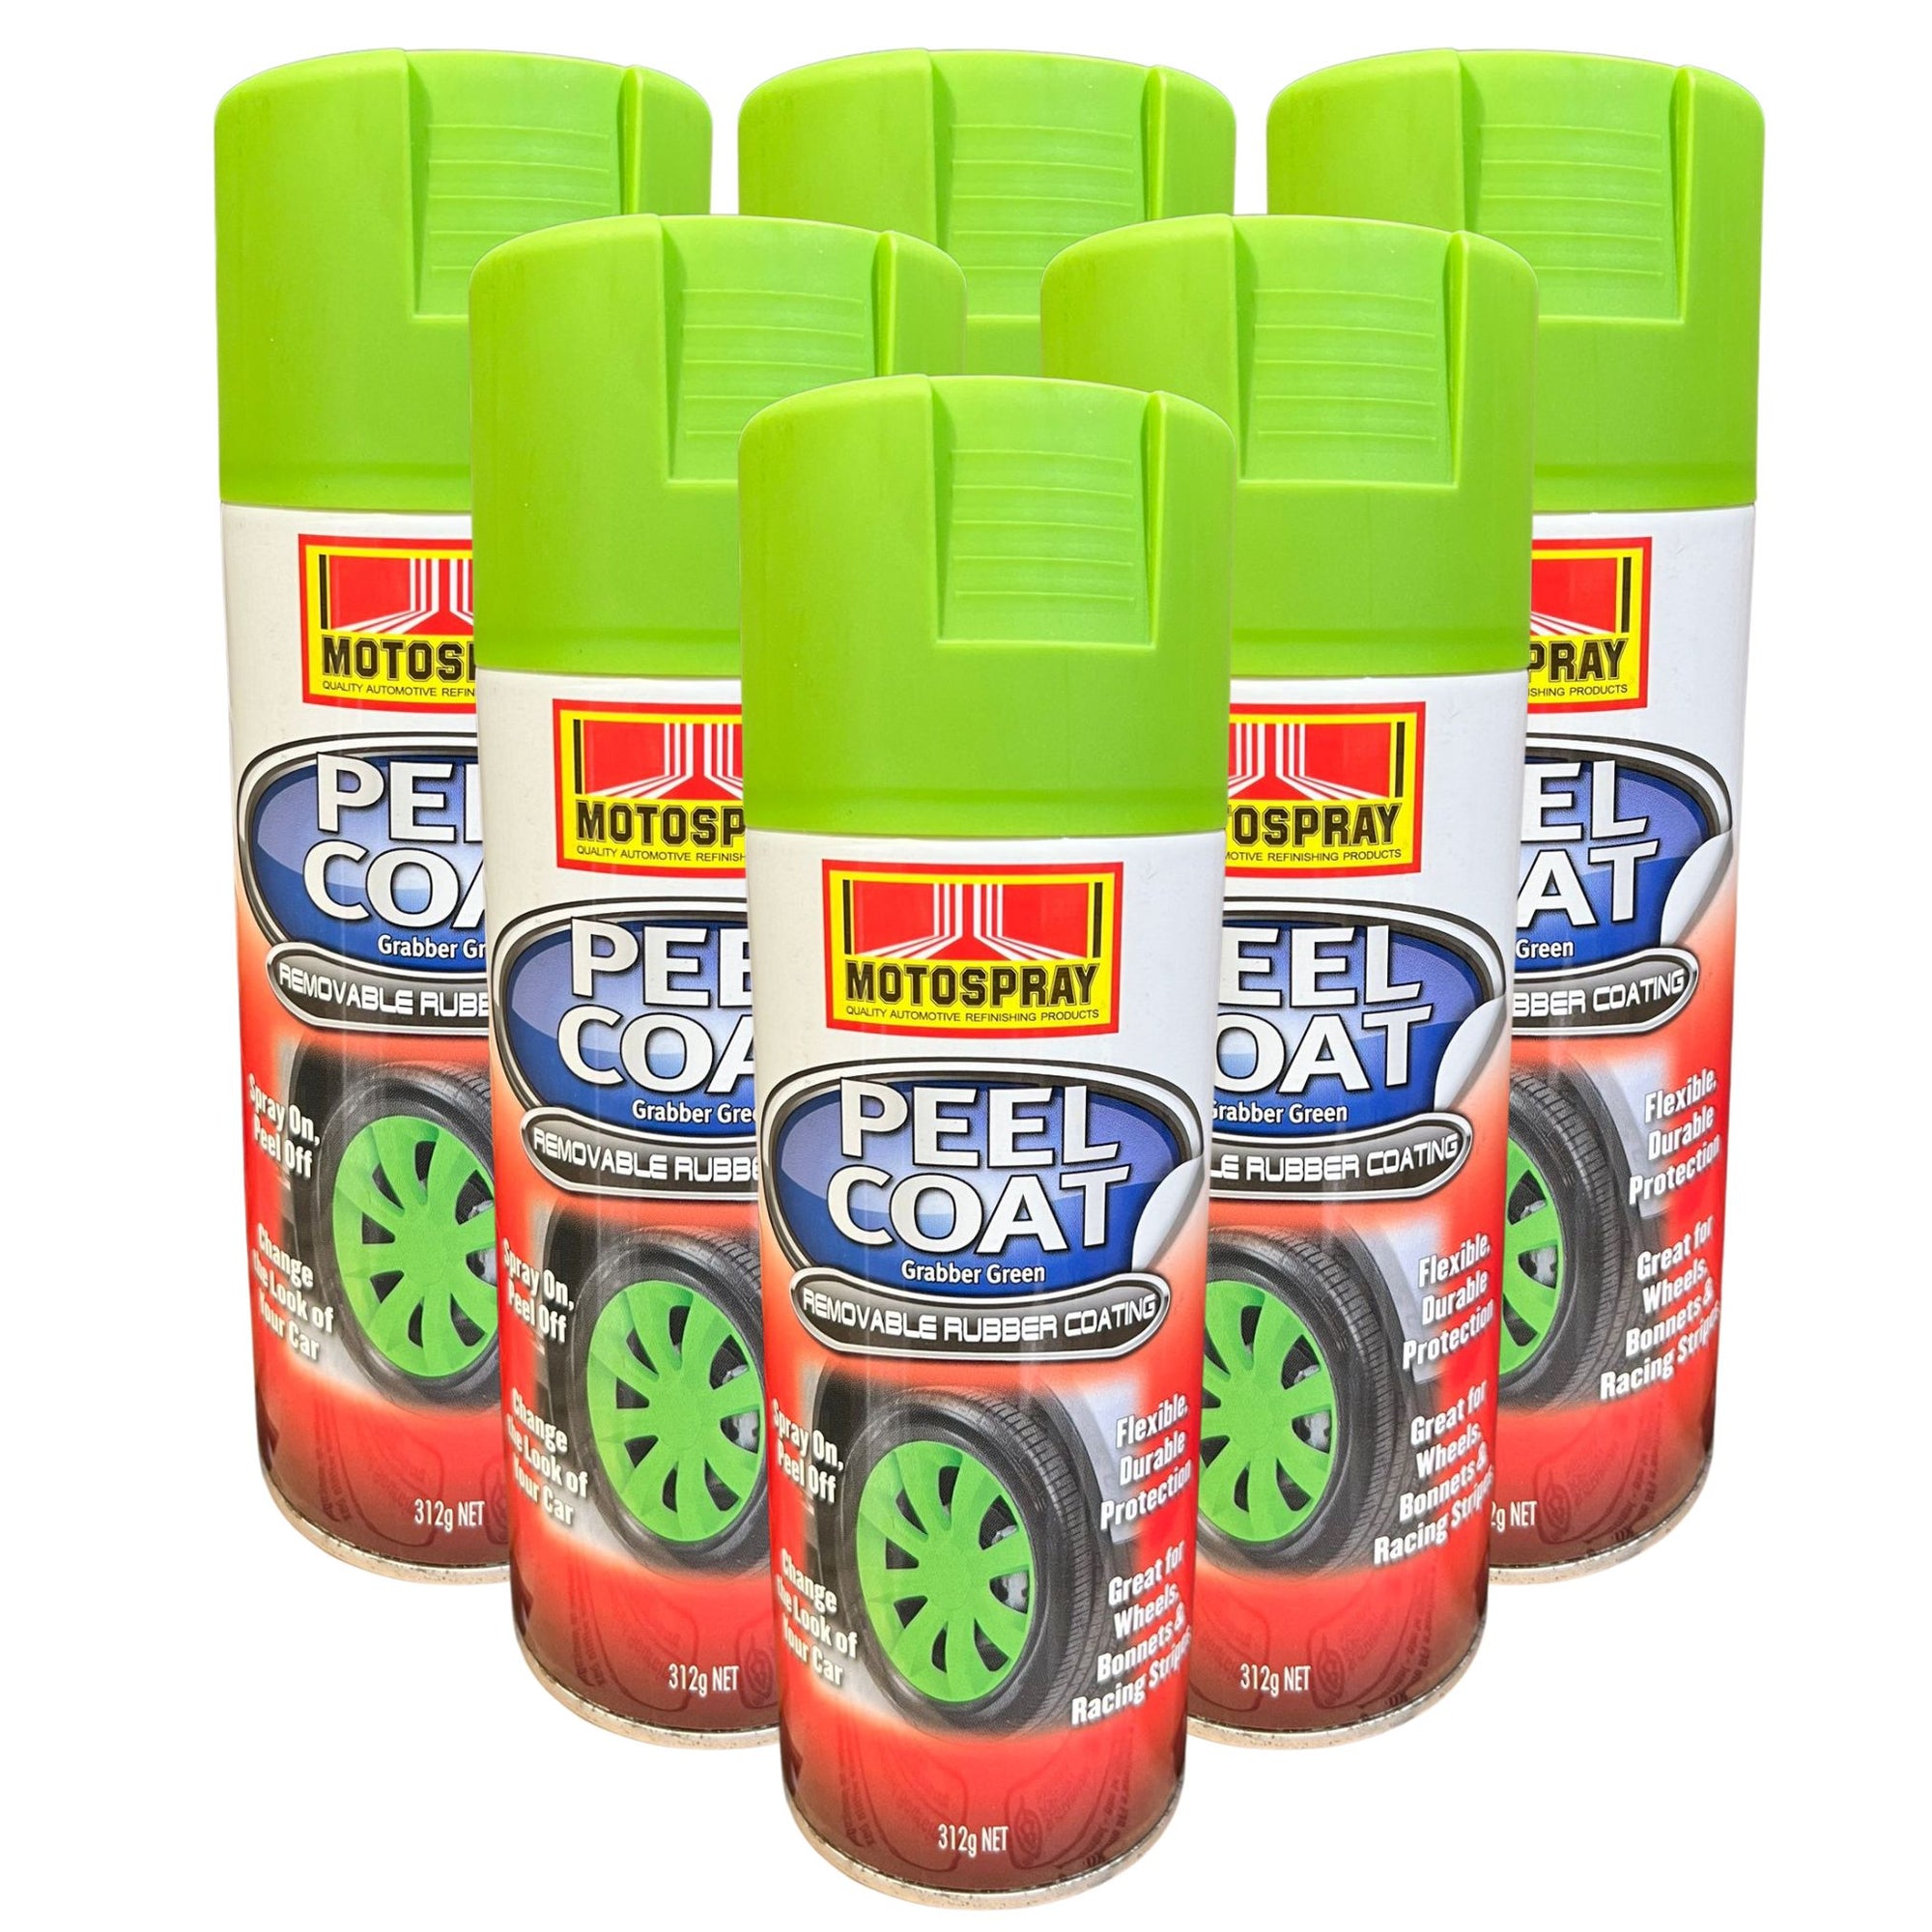 Motospray Peel Coat Rubberized Removable Coating - Grabber Green - 6 Pack - South East Clearance Centre